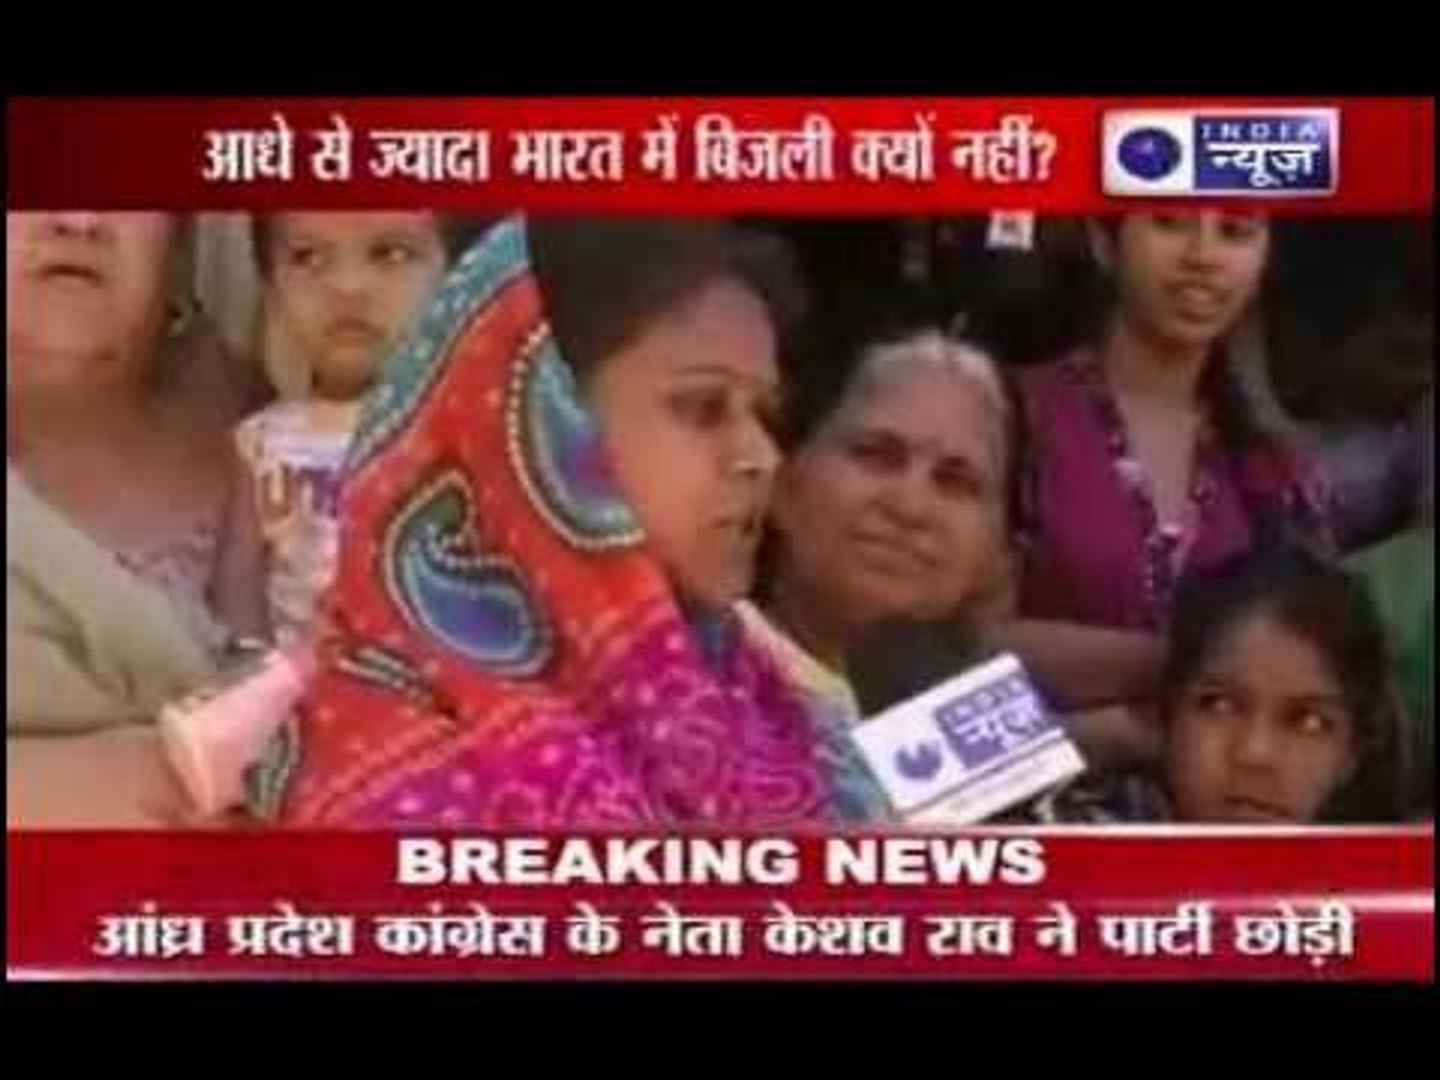 India News: Electricity problems in India